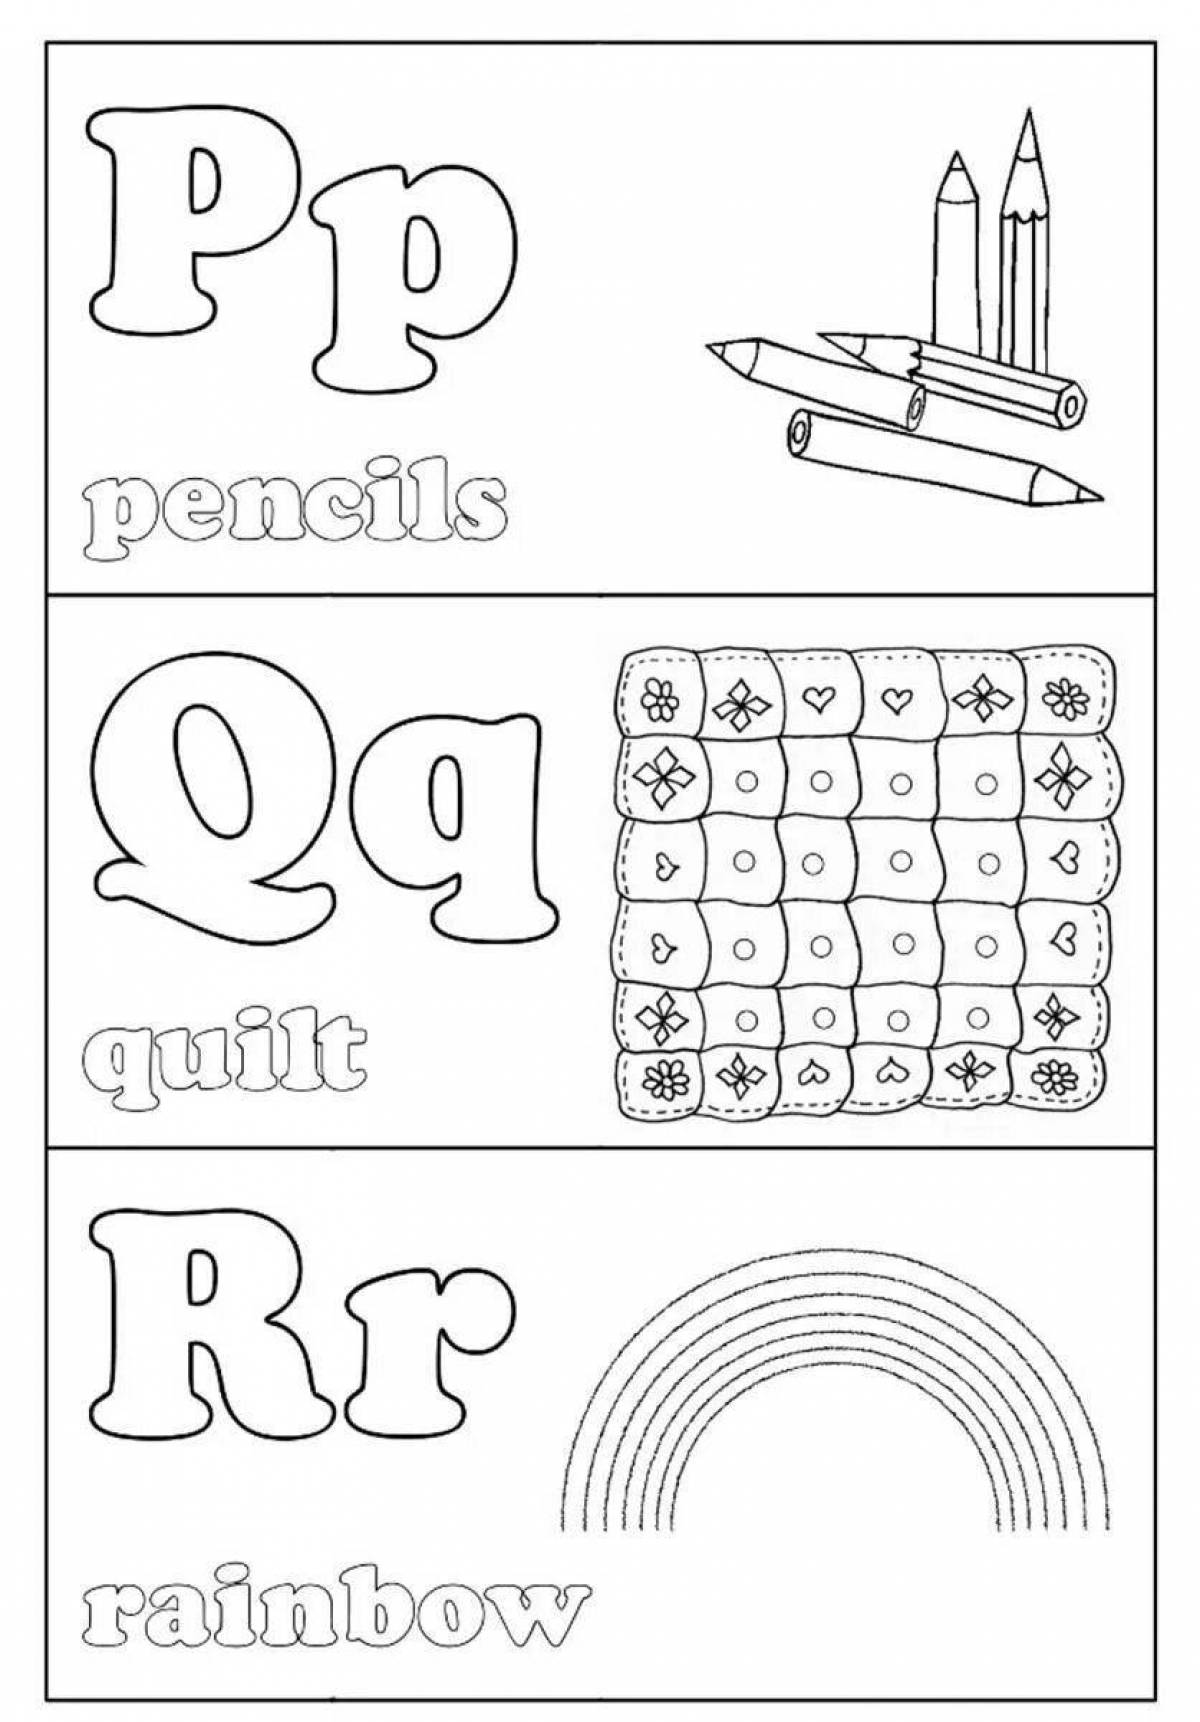 Colorful english alphabet coloring book for babies